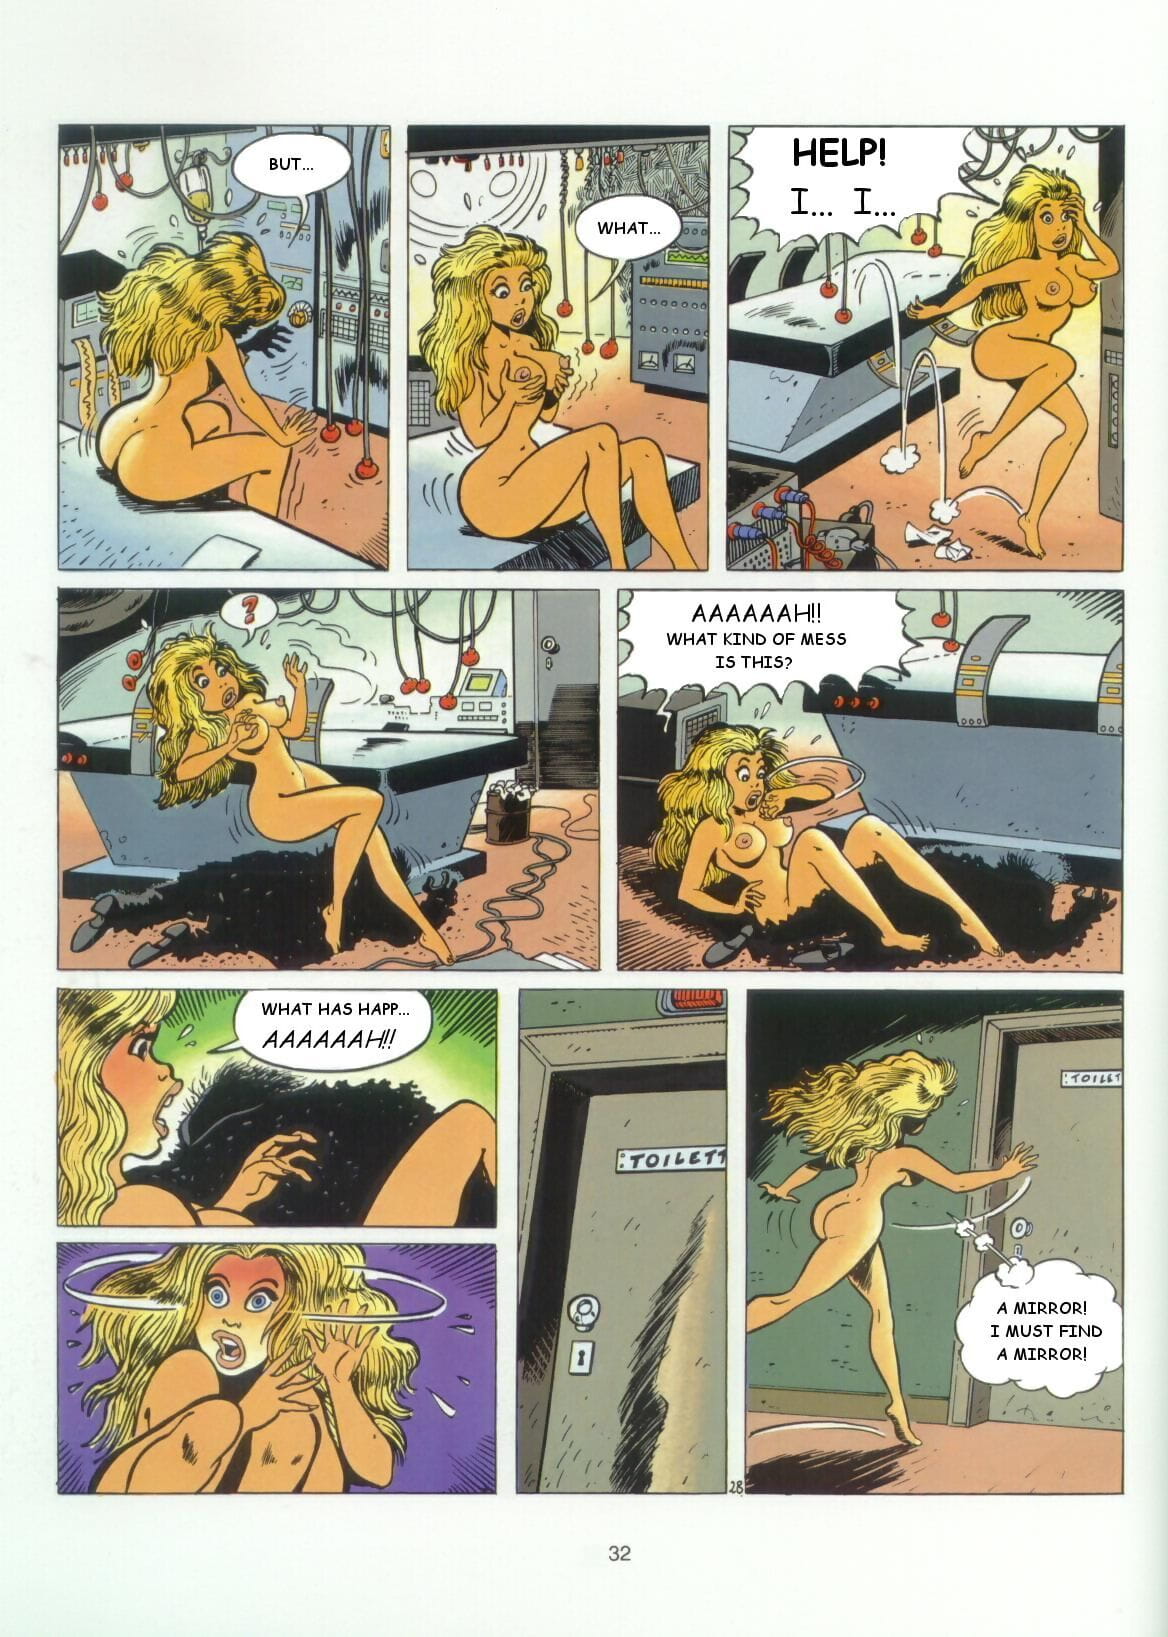 A Real Woman #1 page 1